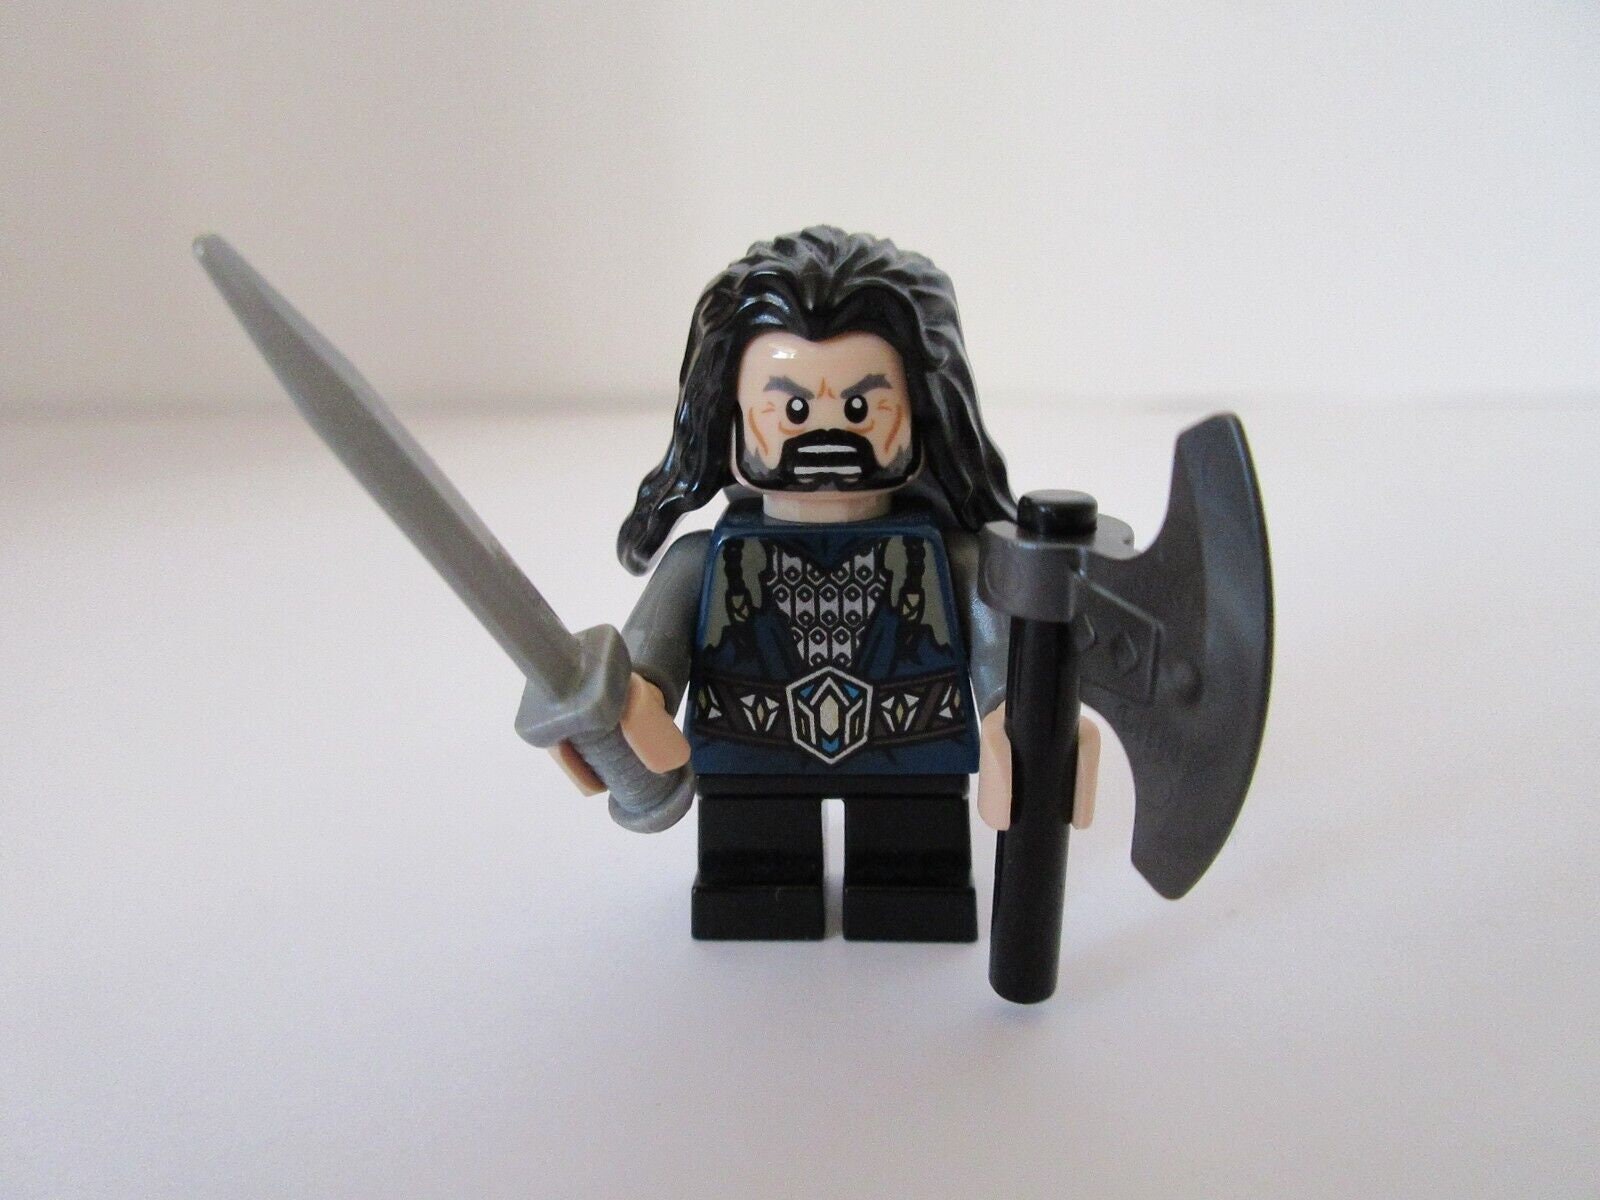 Gnide Kostbar Kæmpe stor Lego MINIFIGURE Hobbit Lord of the Rings Thorin Oakenshield - Etsy